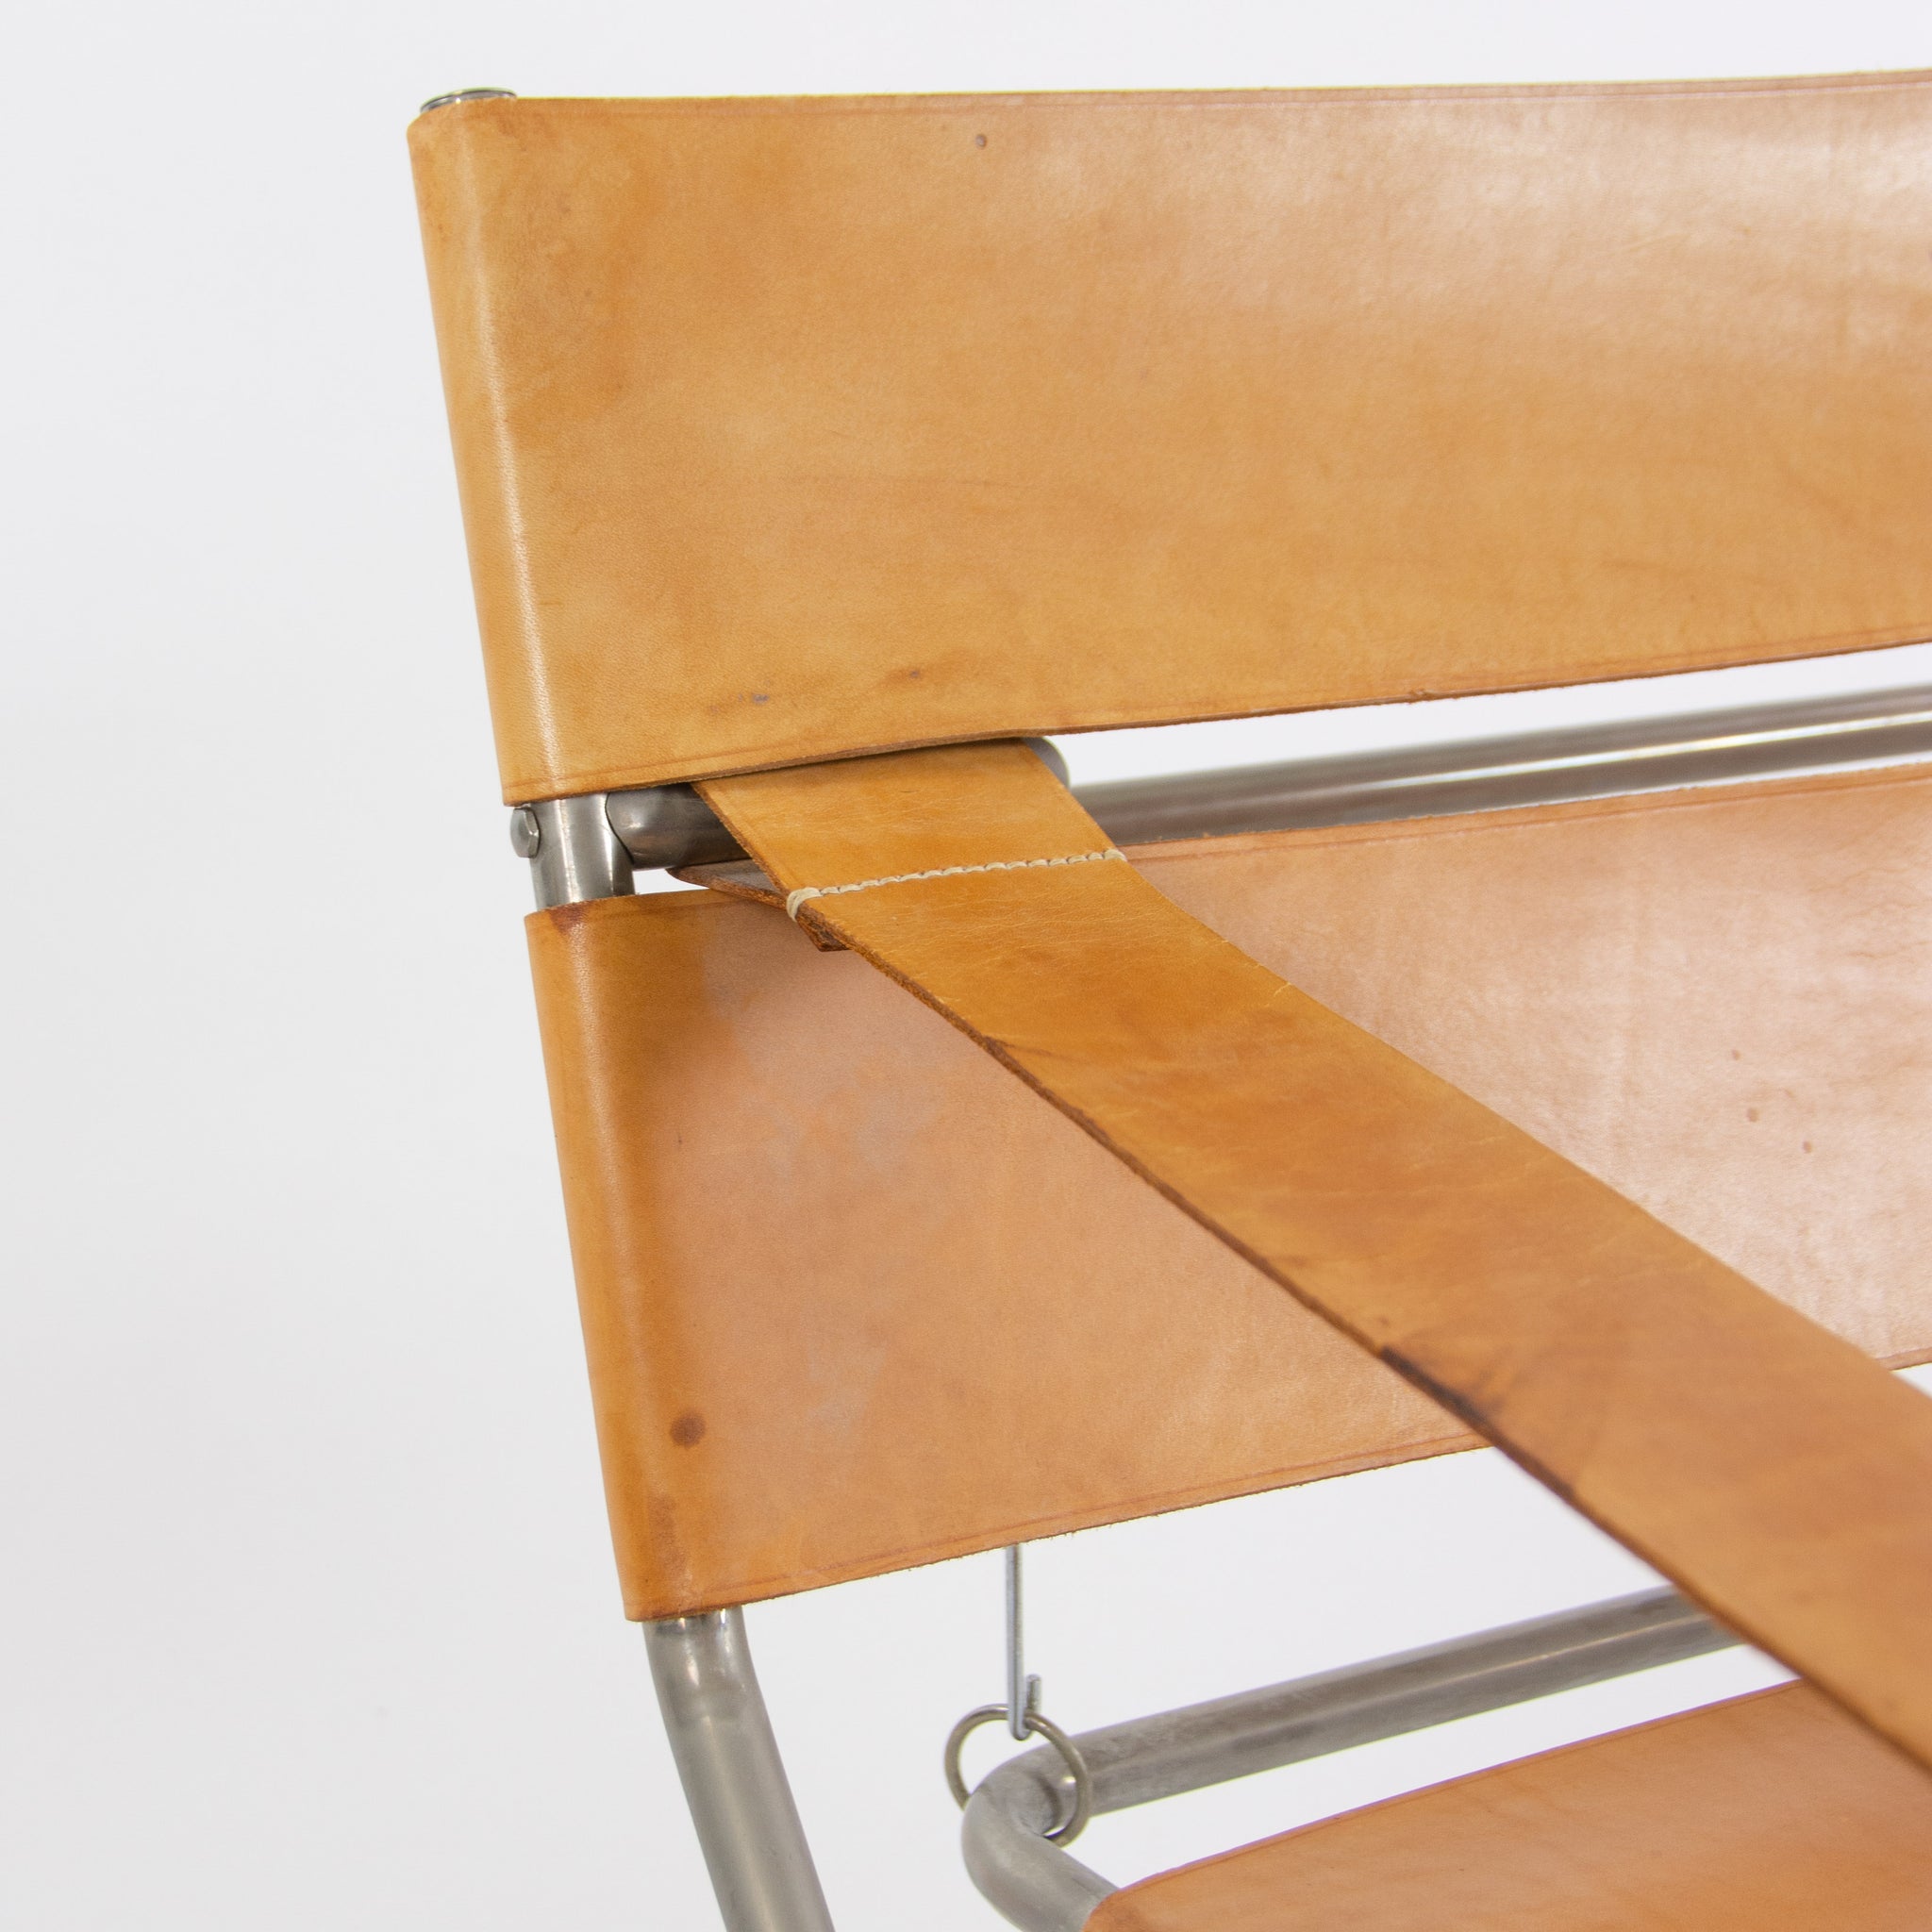 SOLD 1970s Marcel Breuer for Tecta Bauhaus B4 D4 Folding Chairs in Tan Leather Pair